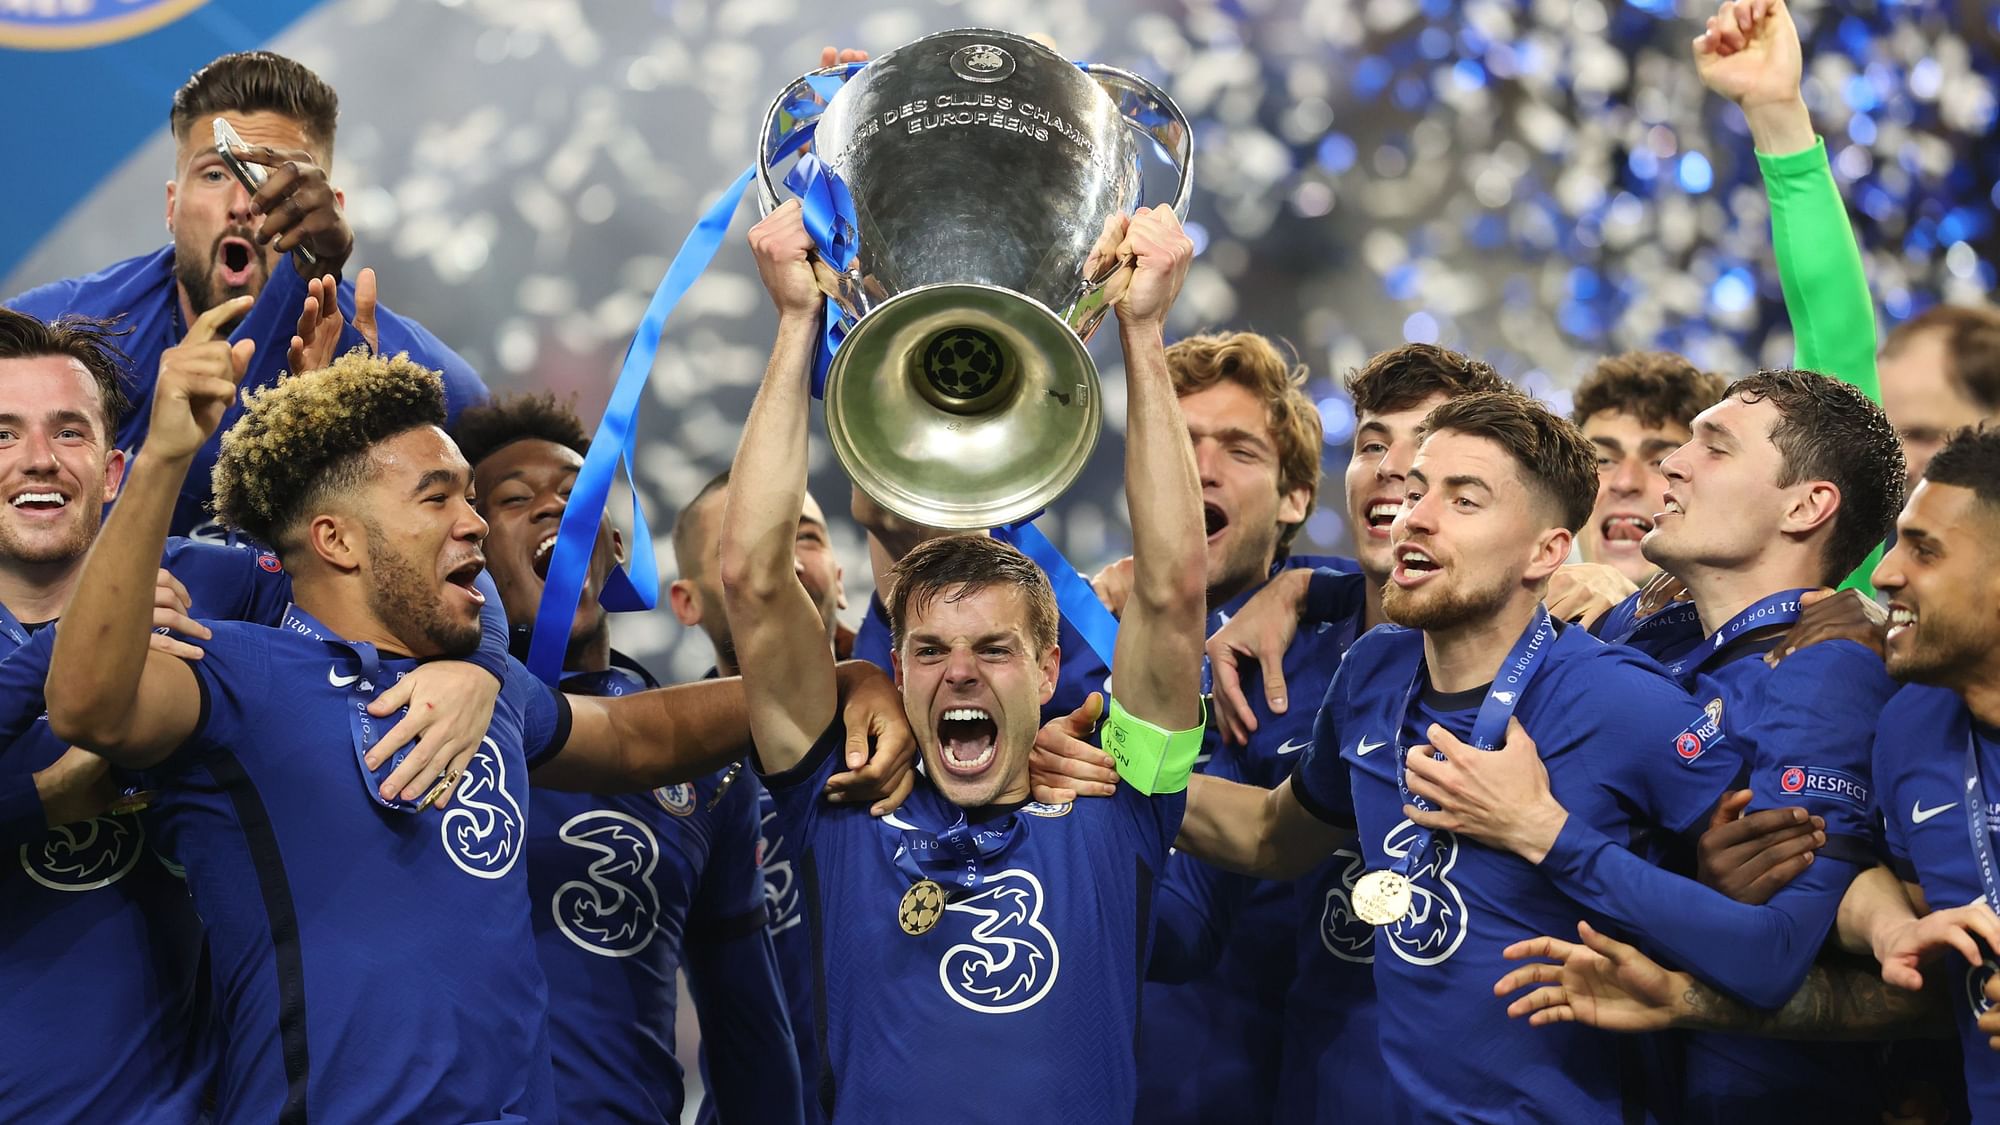 <div class="paragraphs"><p>Chelsea won their second UEFA Champions League title after defeating Manchester City 1-0 in Porto in 2021.&nbsp;</p></div>